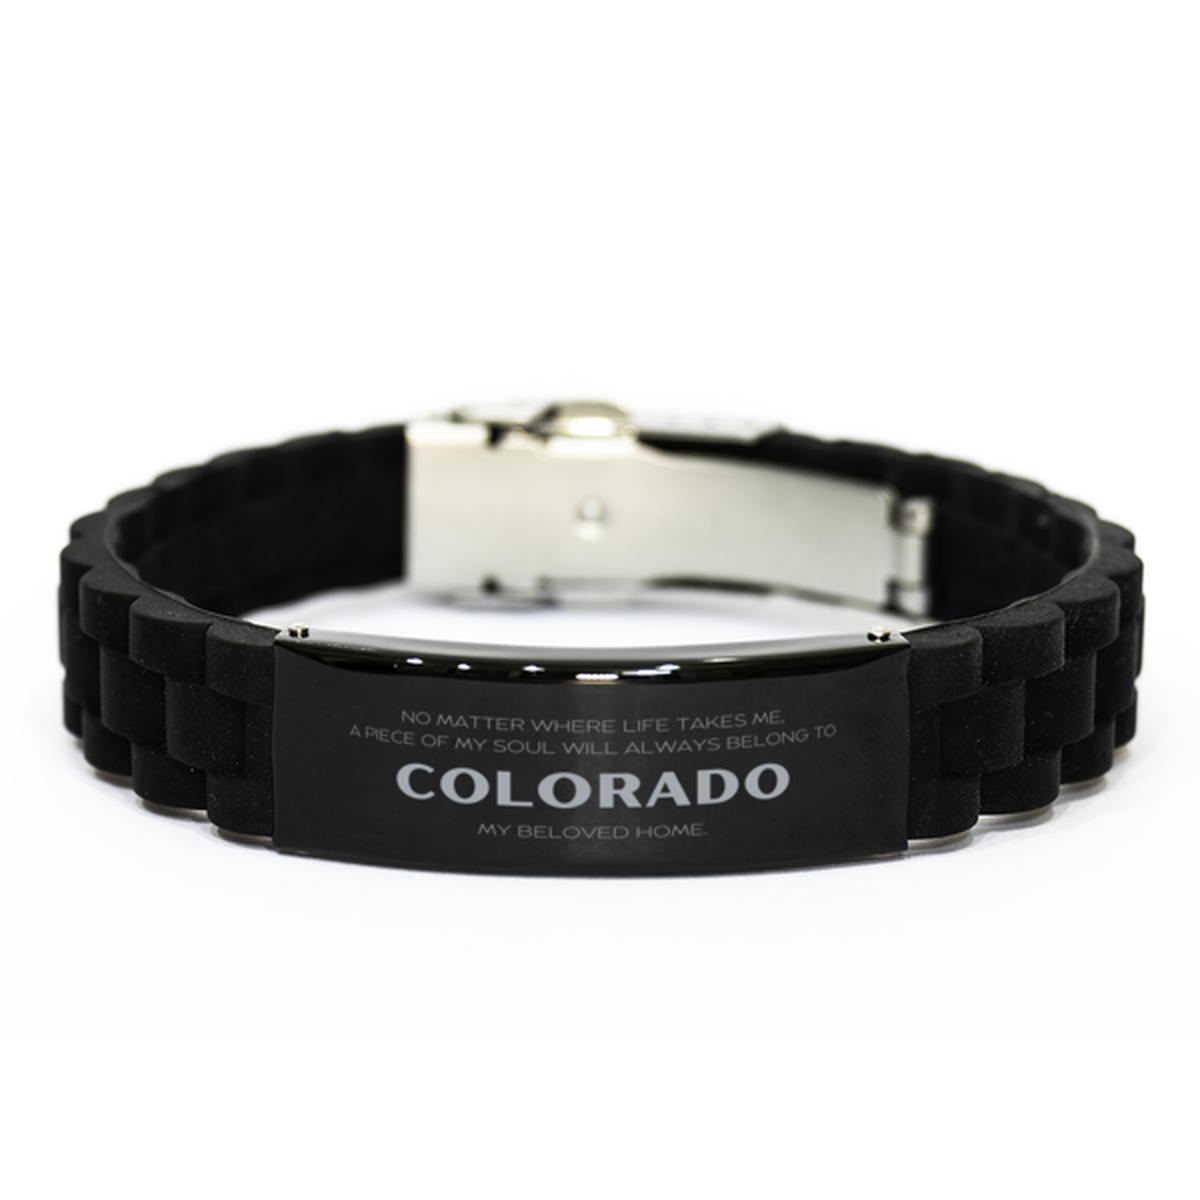 Love Colorado State Gifts, My soul will always belong to Colorado, Proud Black Glidelock Clasp Bracelet, Birthday Unique Gifts For Colorado Men, Women, Friends